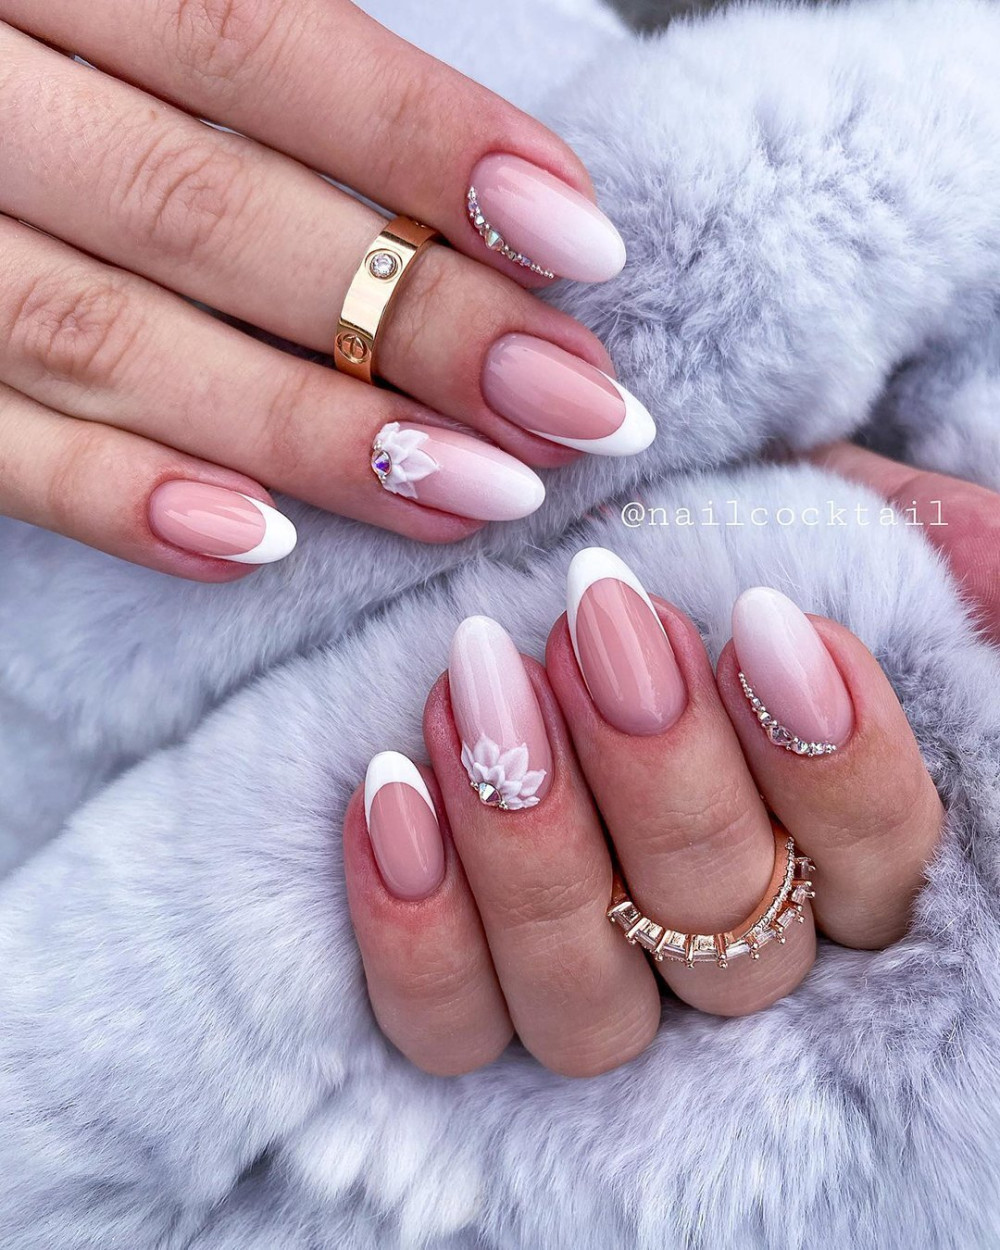 35 Breathtaking Nail Design Ideas For The Perfect Manicure - 275